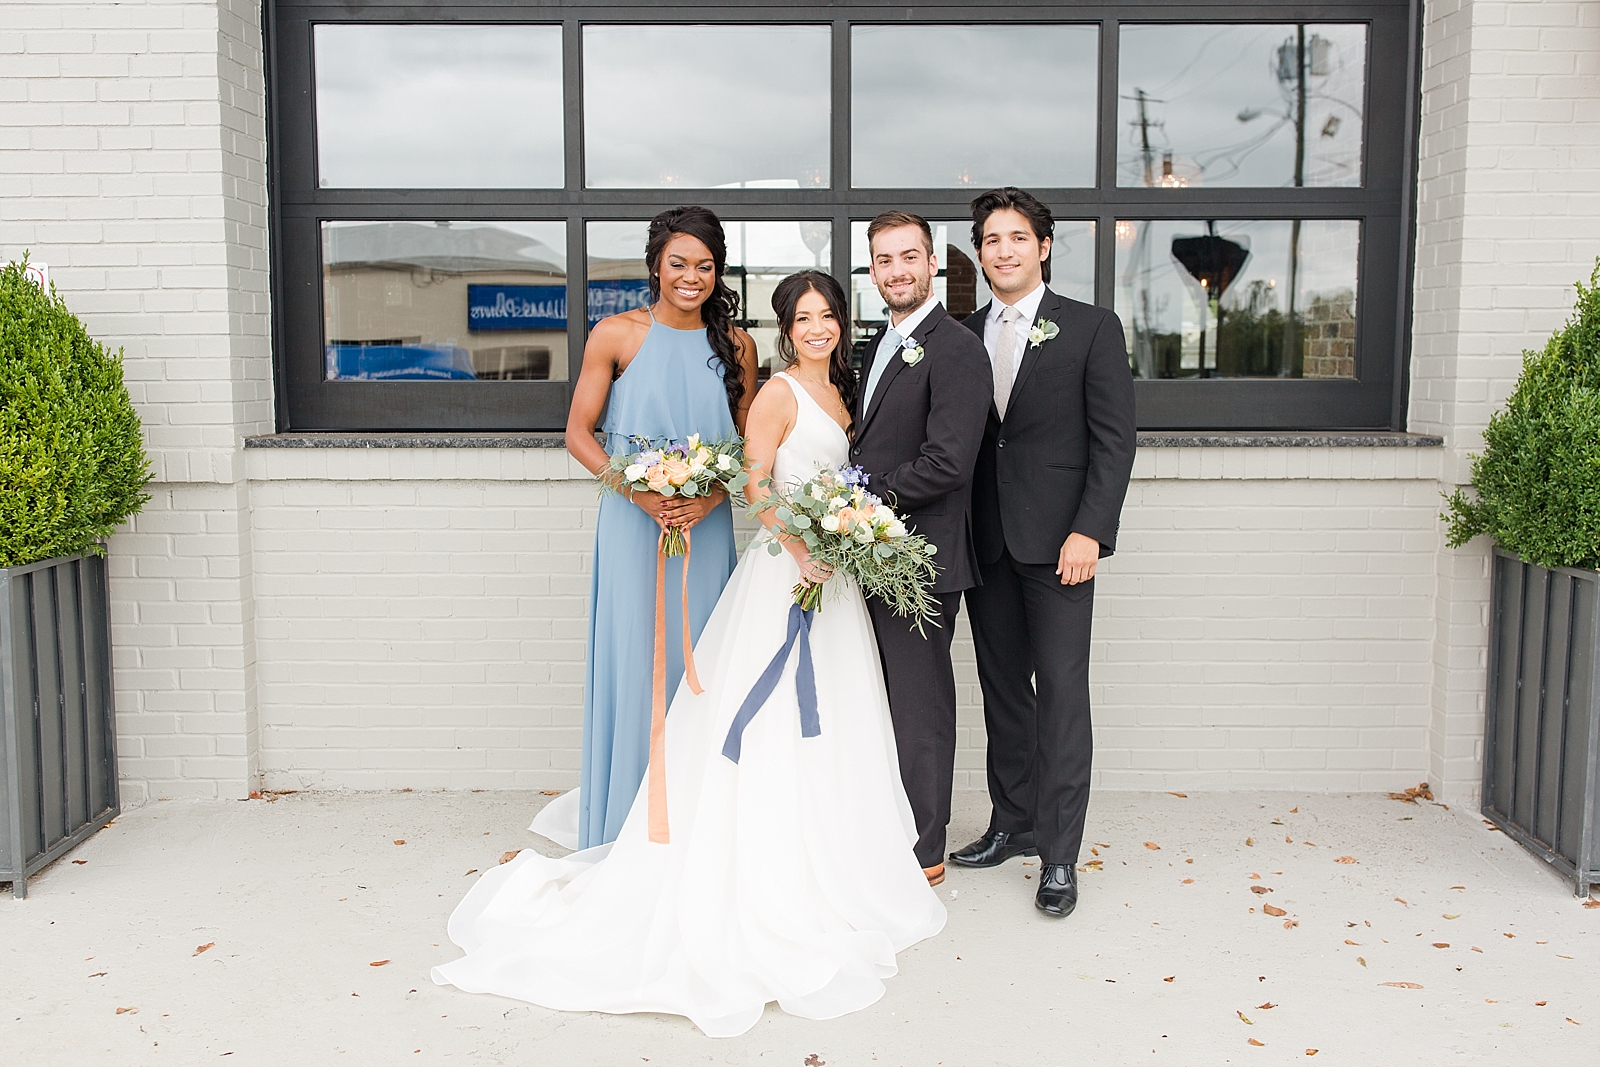 Glover Park Brewery Wedding Bridal Party smiling at camera in front of venue Photo